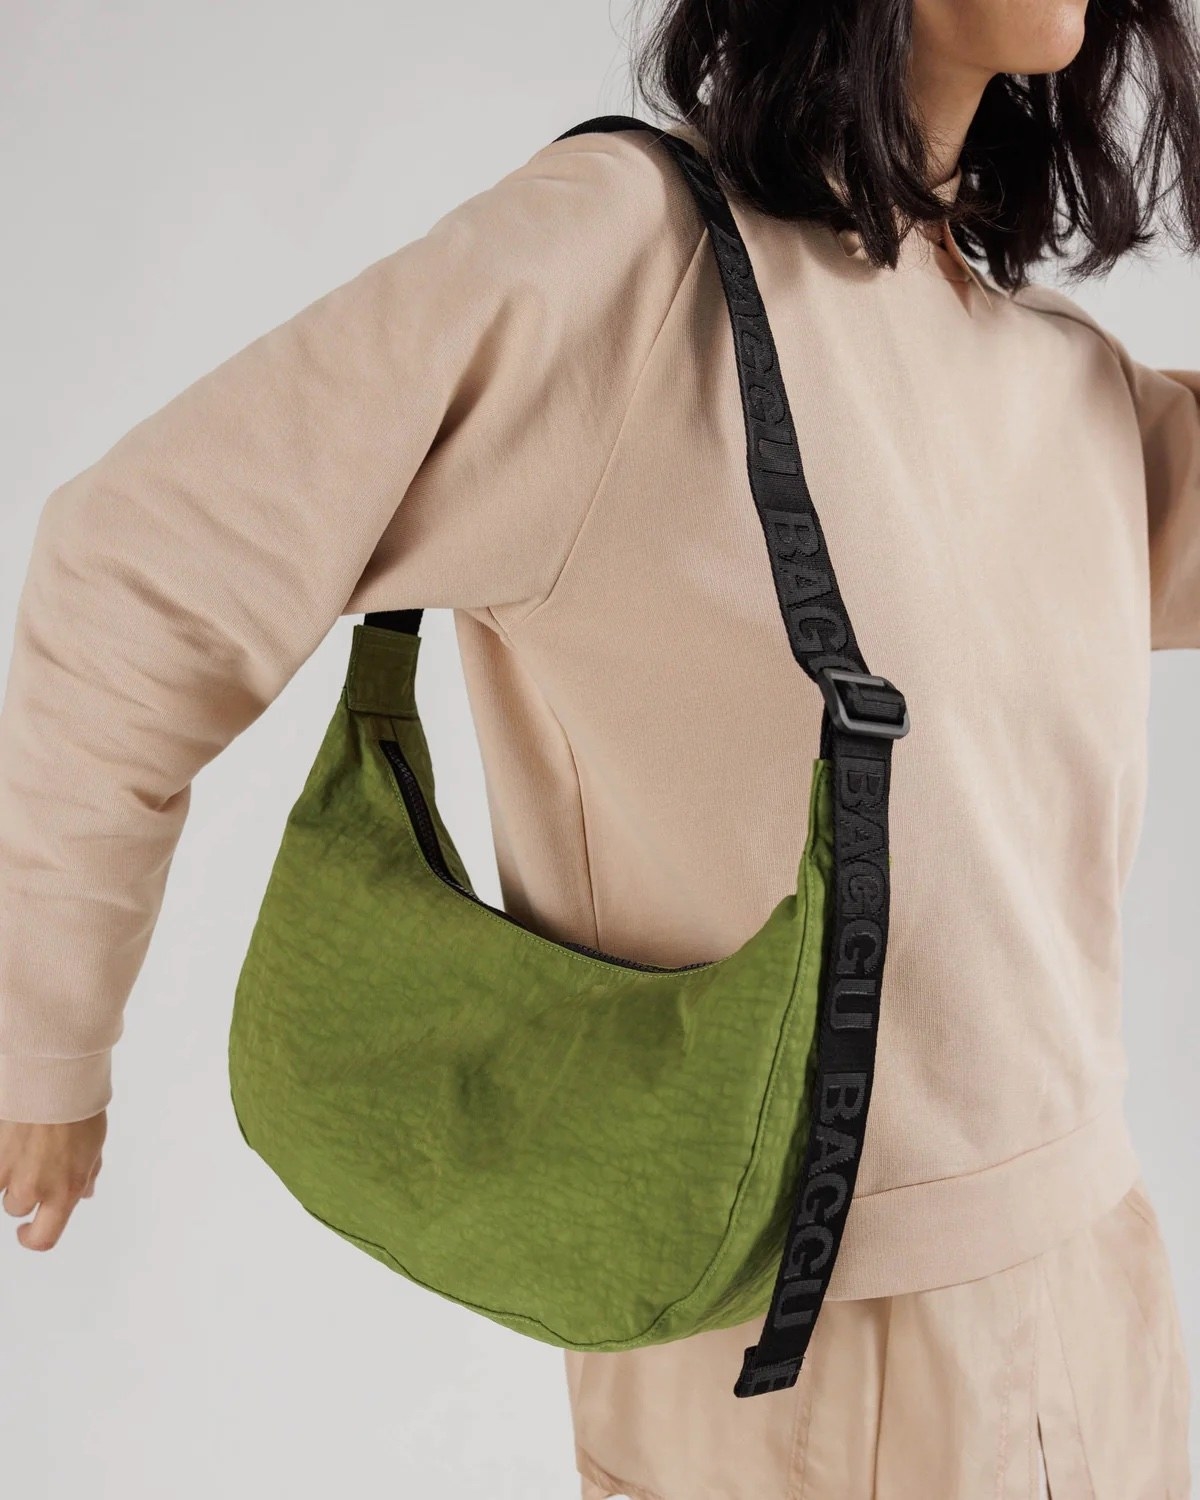 model wearing green crssbody crescent-shaped bag with an adjustable black nylon strap